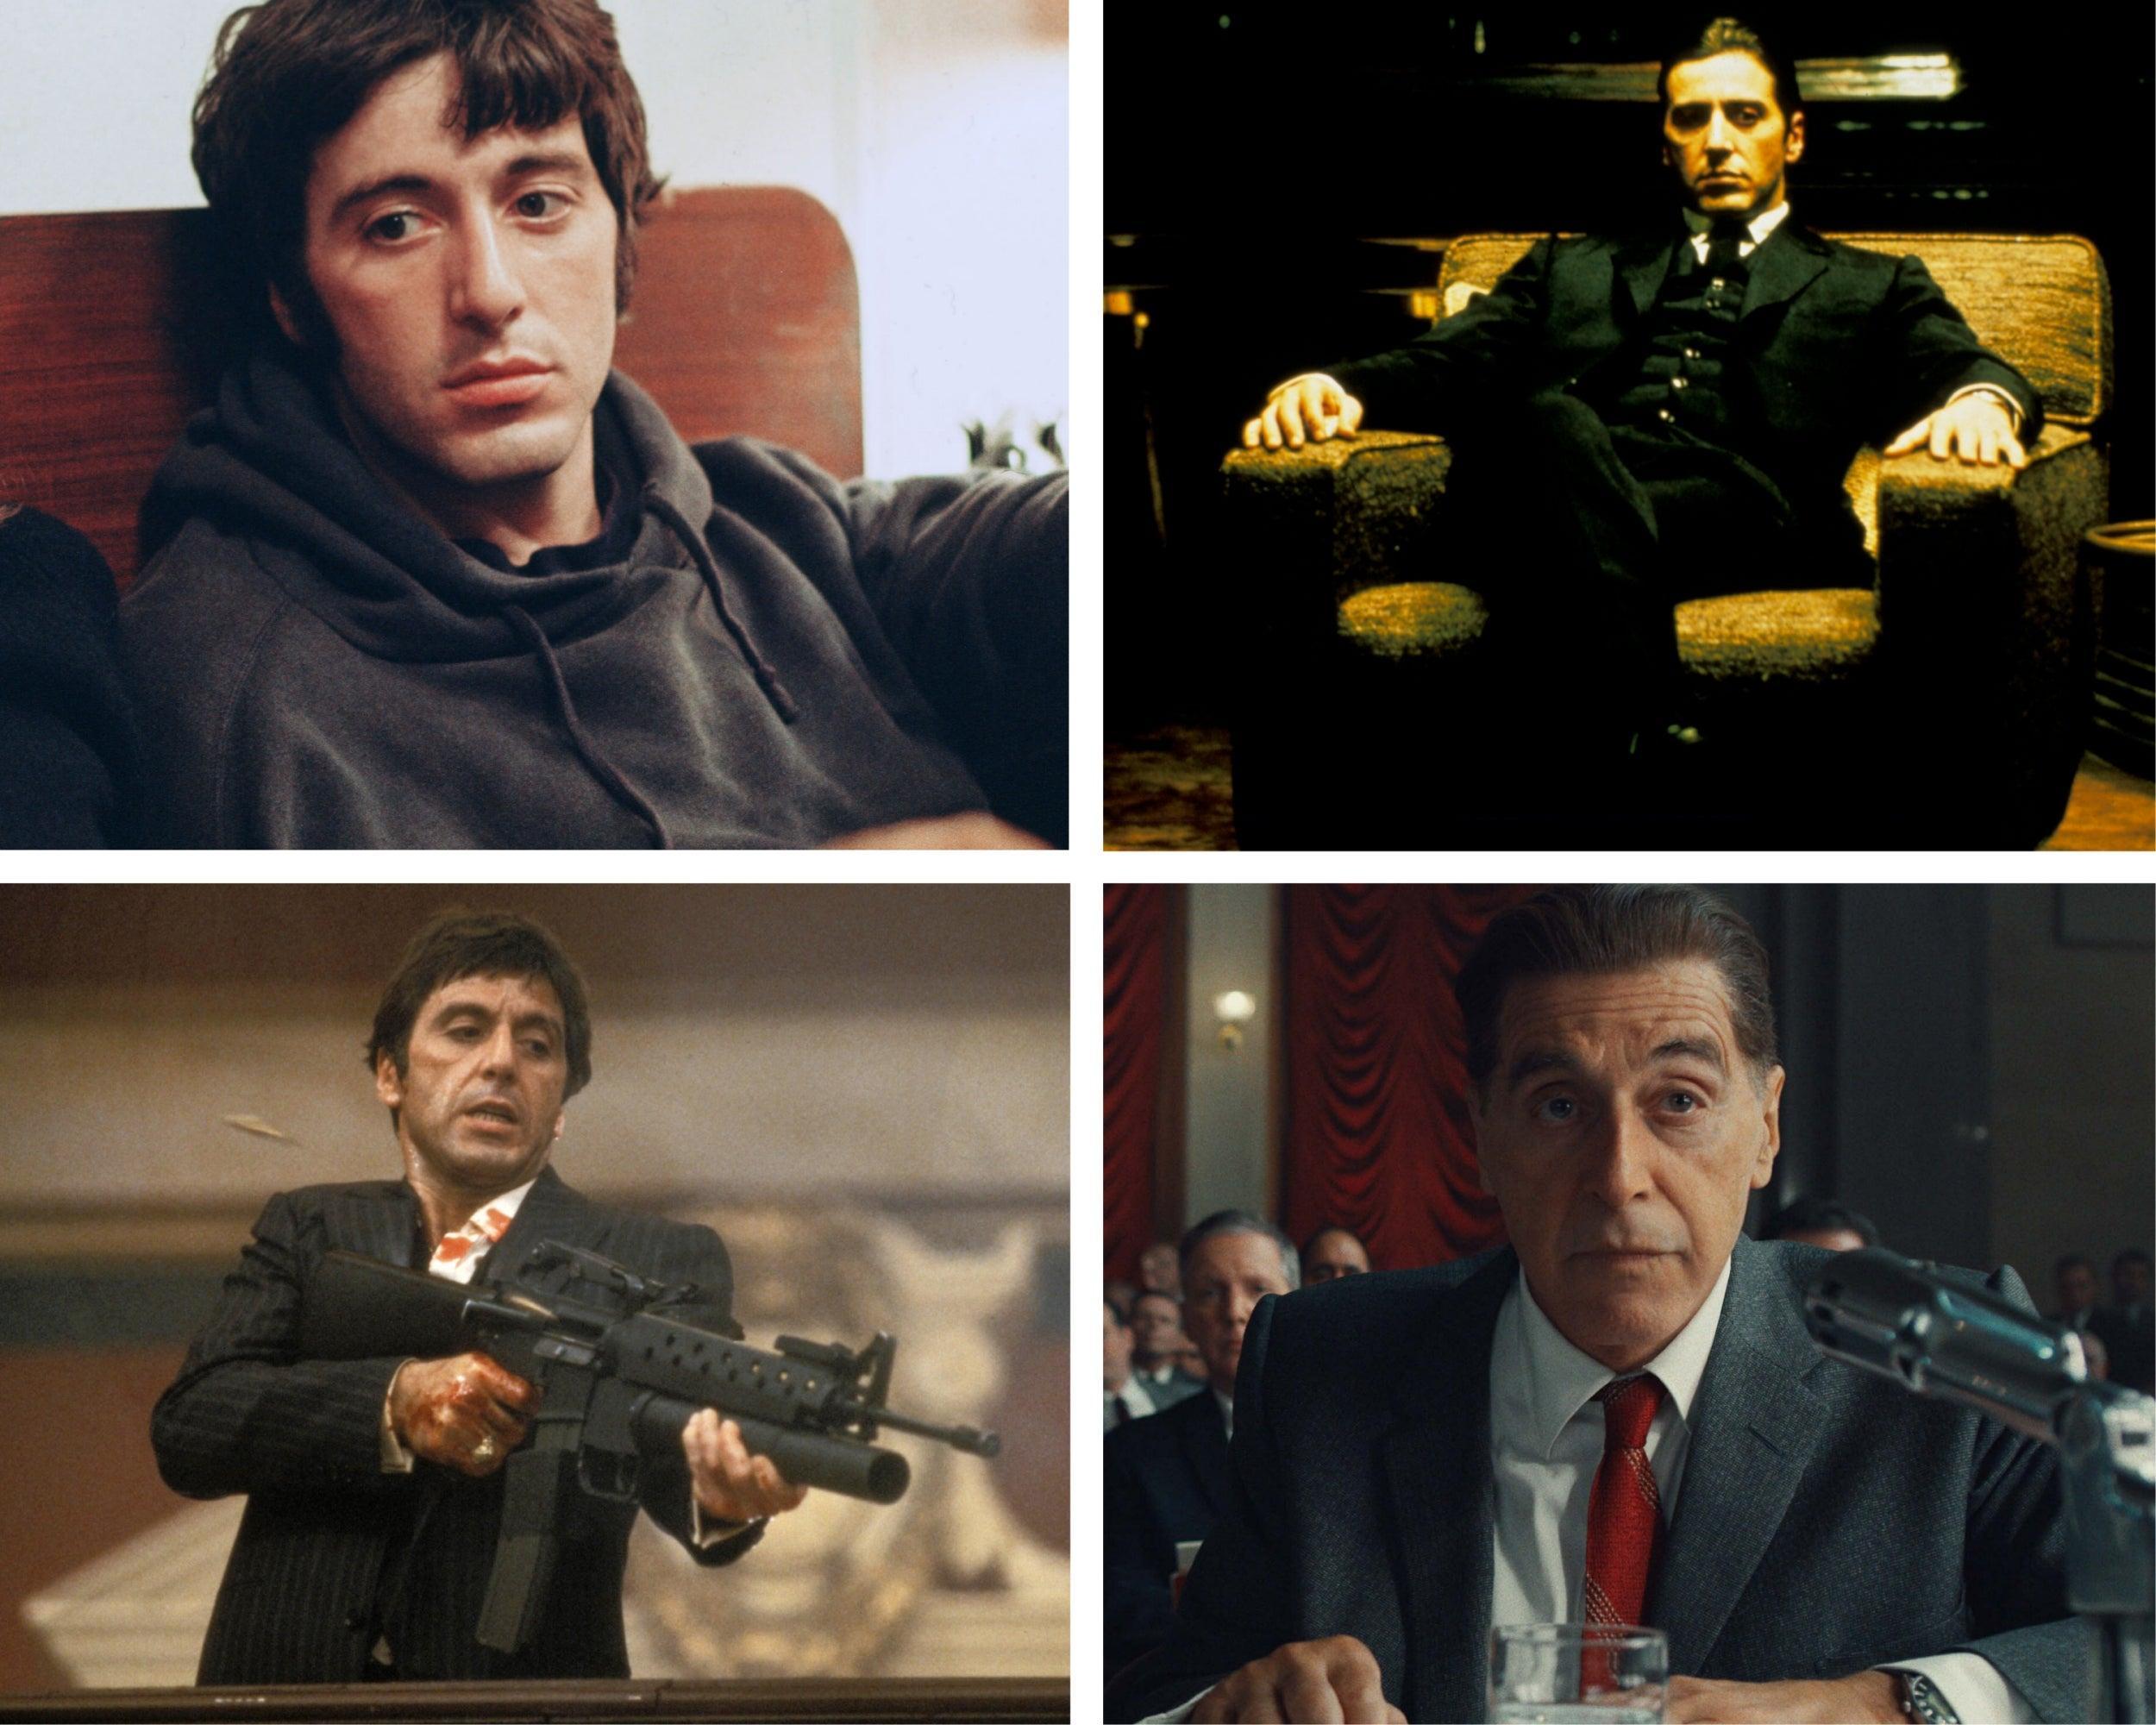 Acting his rage: Pacino in (clockwise, from top left) ‘The Panic in Needle Park’, ‘The Godfather Part II’, ‘The Irishman’ and ‘Scarface’